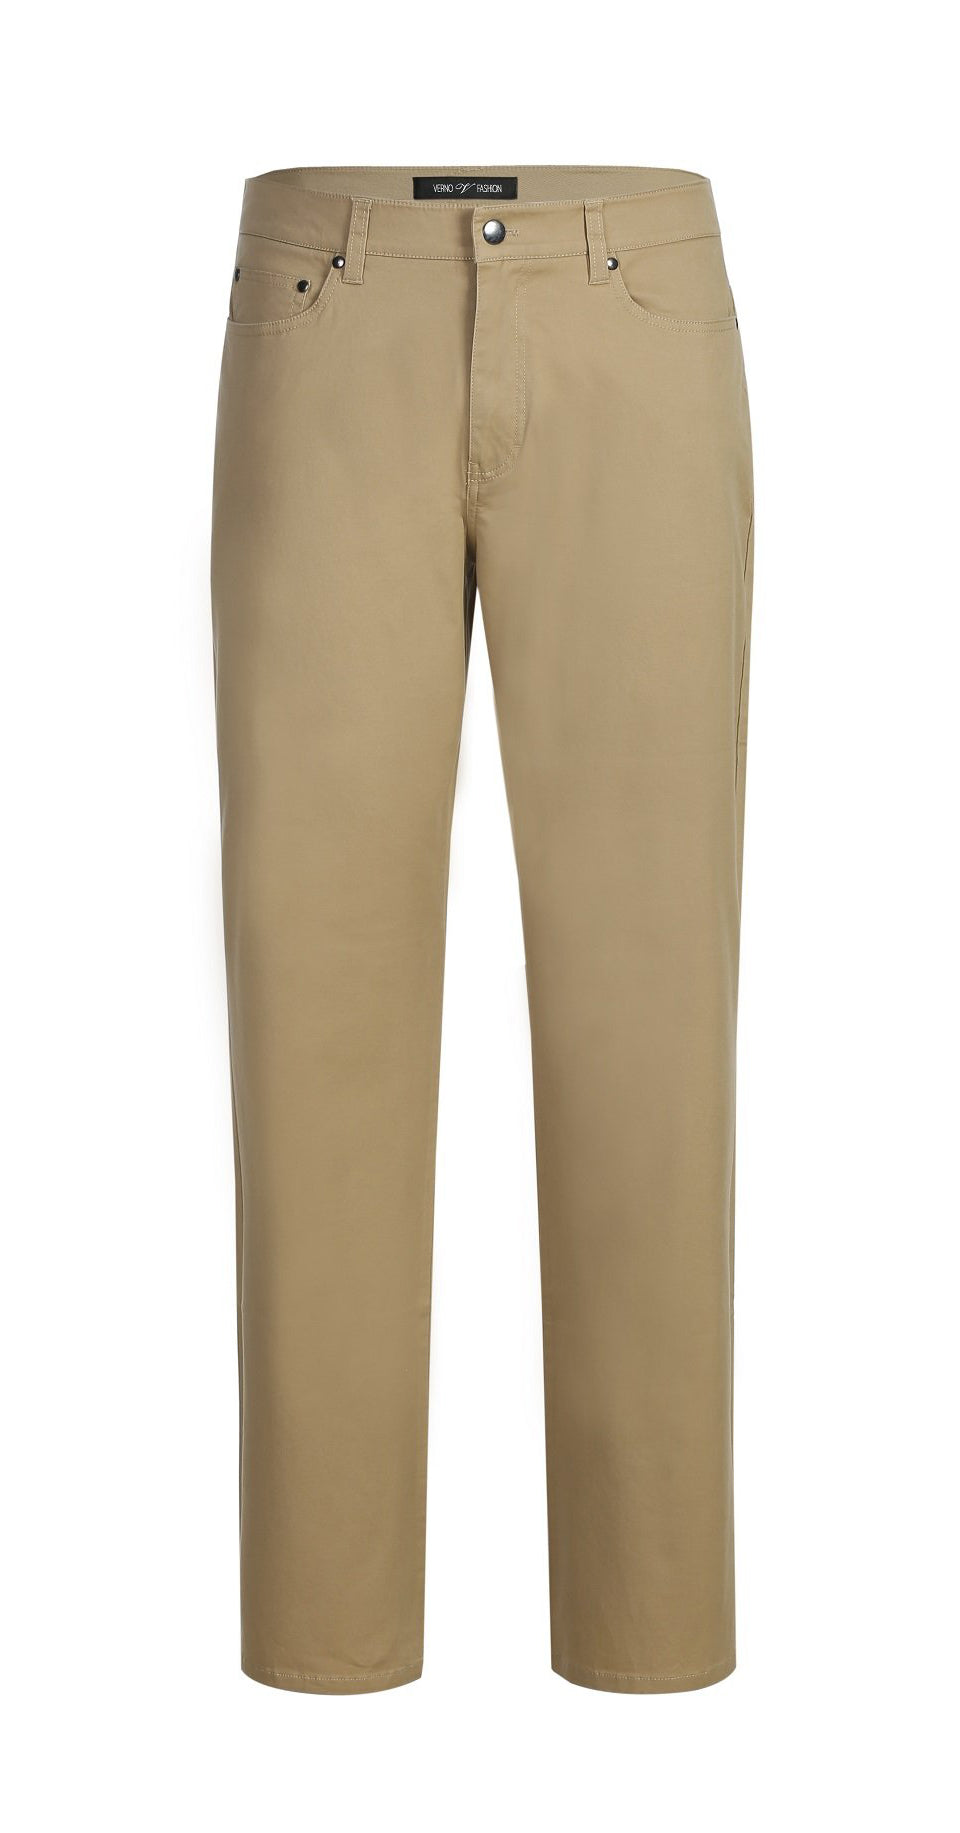 Stretch Cotton Flat Front Pants Straight Legs in Khaki